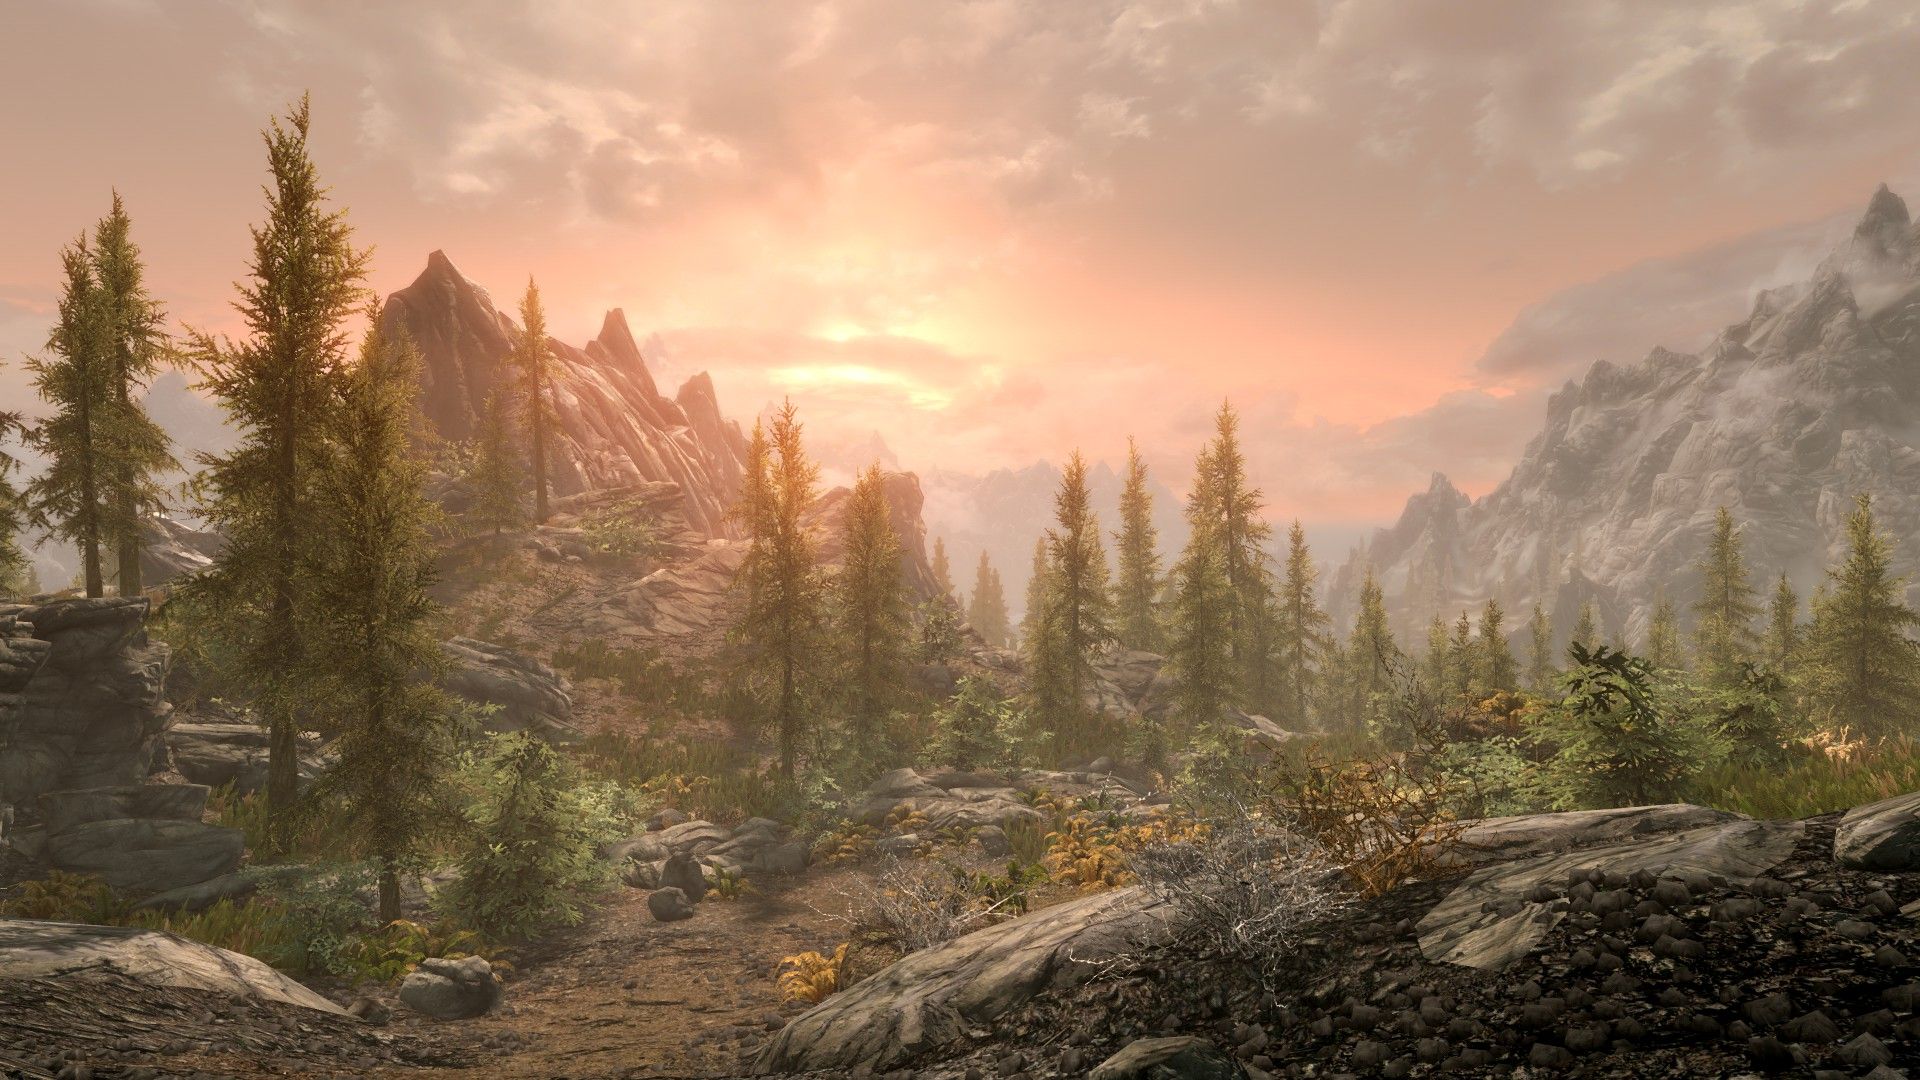 Skyrim: Special Edition - No mods, no filters. Removed UI. This game is gorgeous!